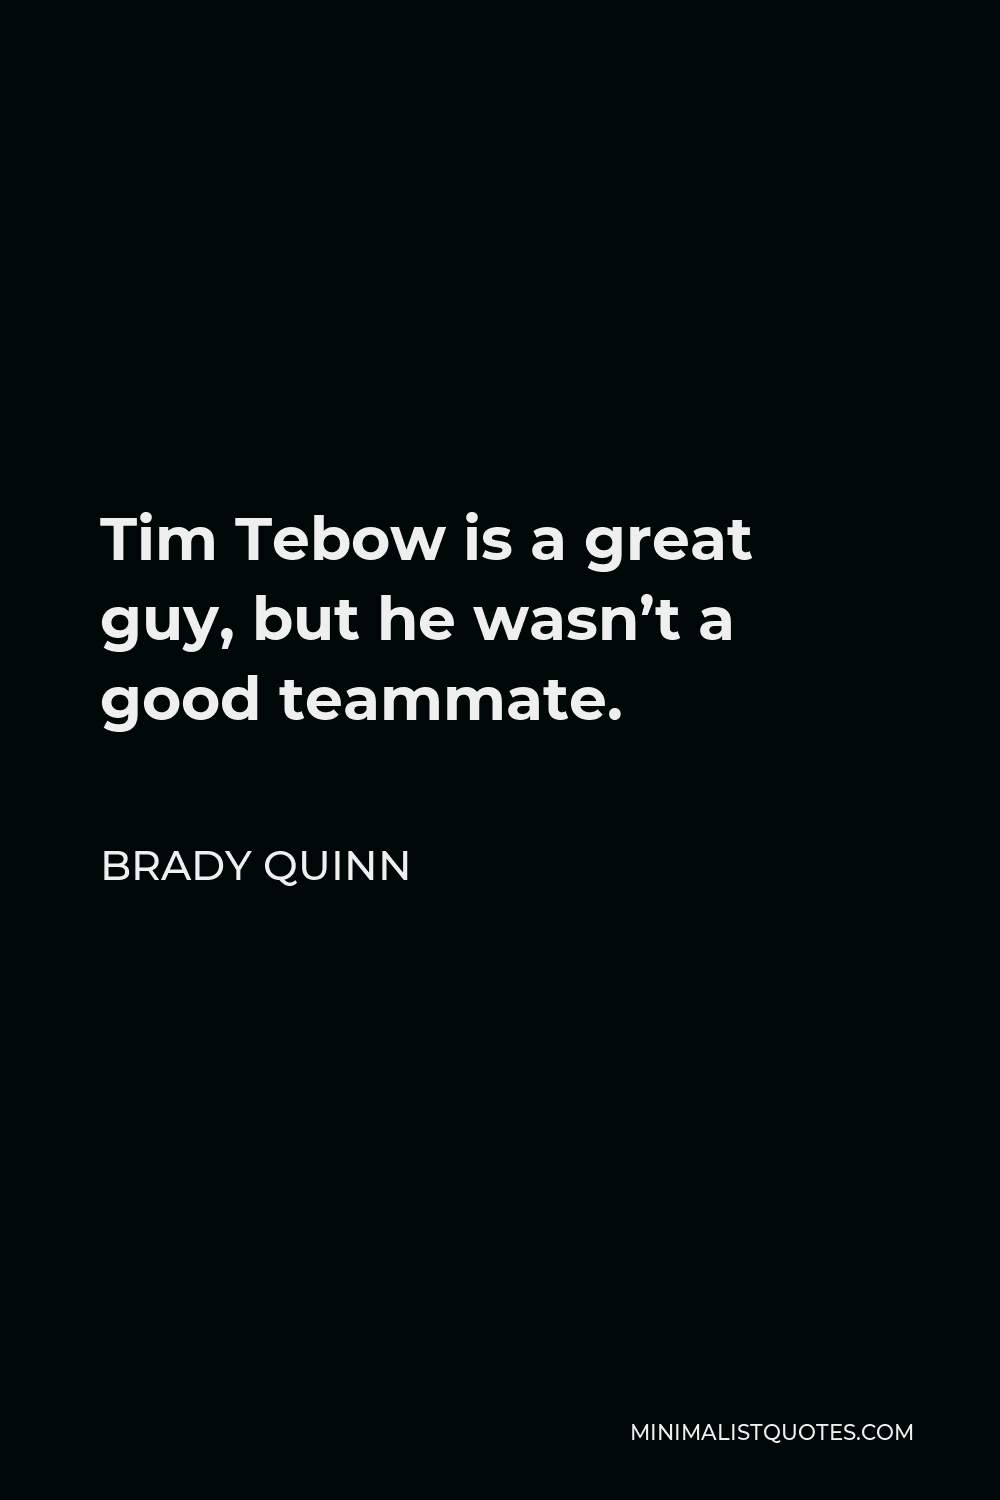 Brady Quinn Quote - Tim Tebow is a great guy, but he wasn’t a good teammate.